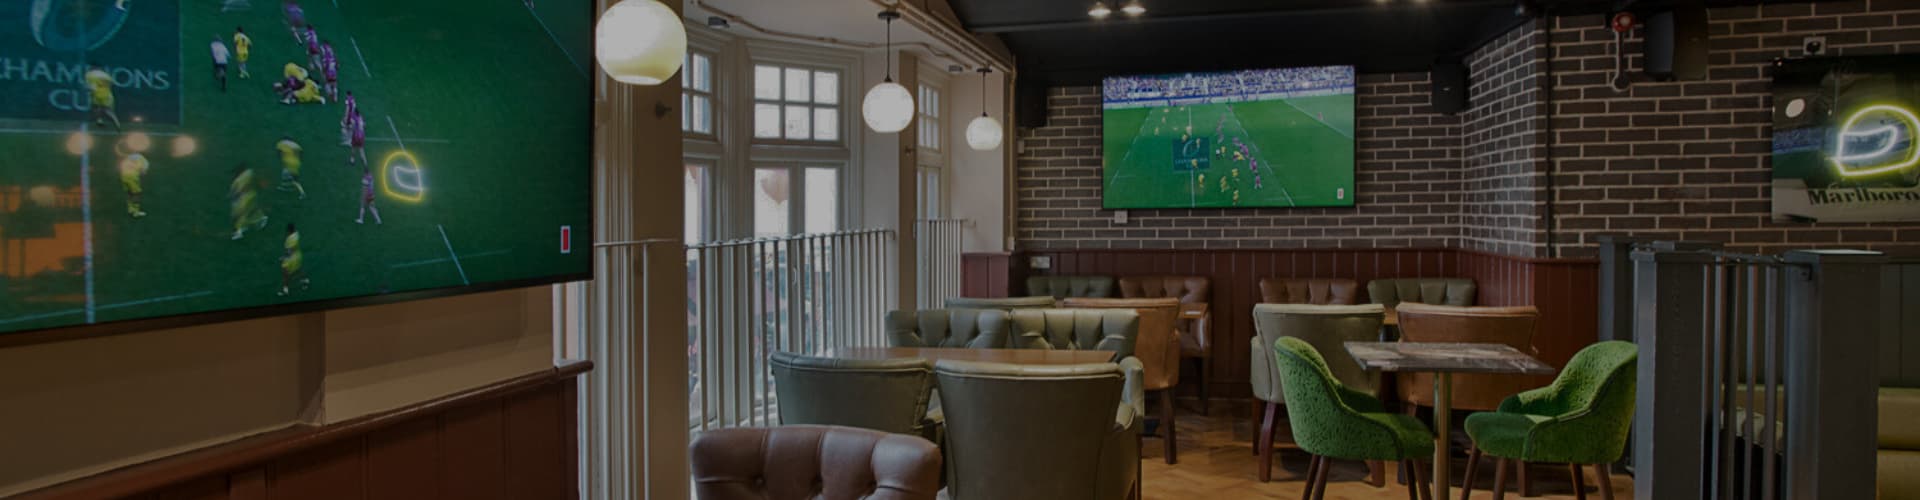 Watch Rugby Union live at Clubhouse 5